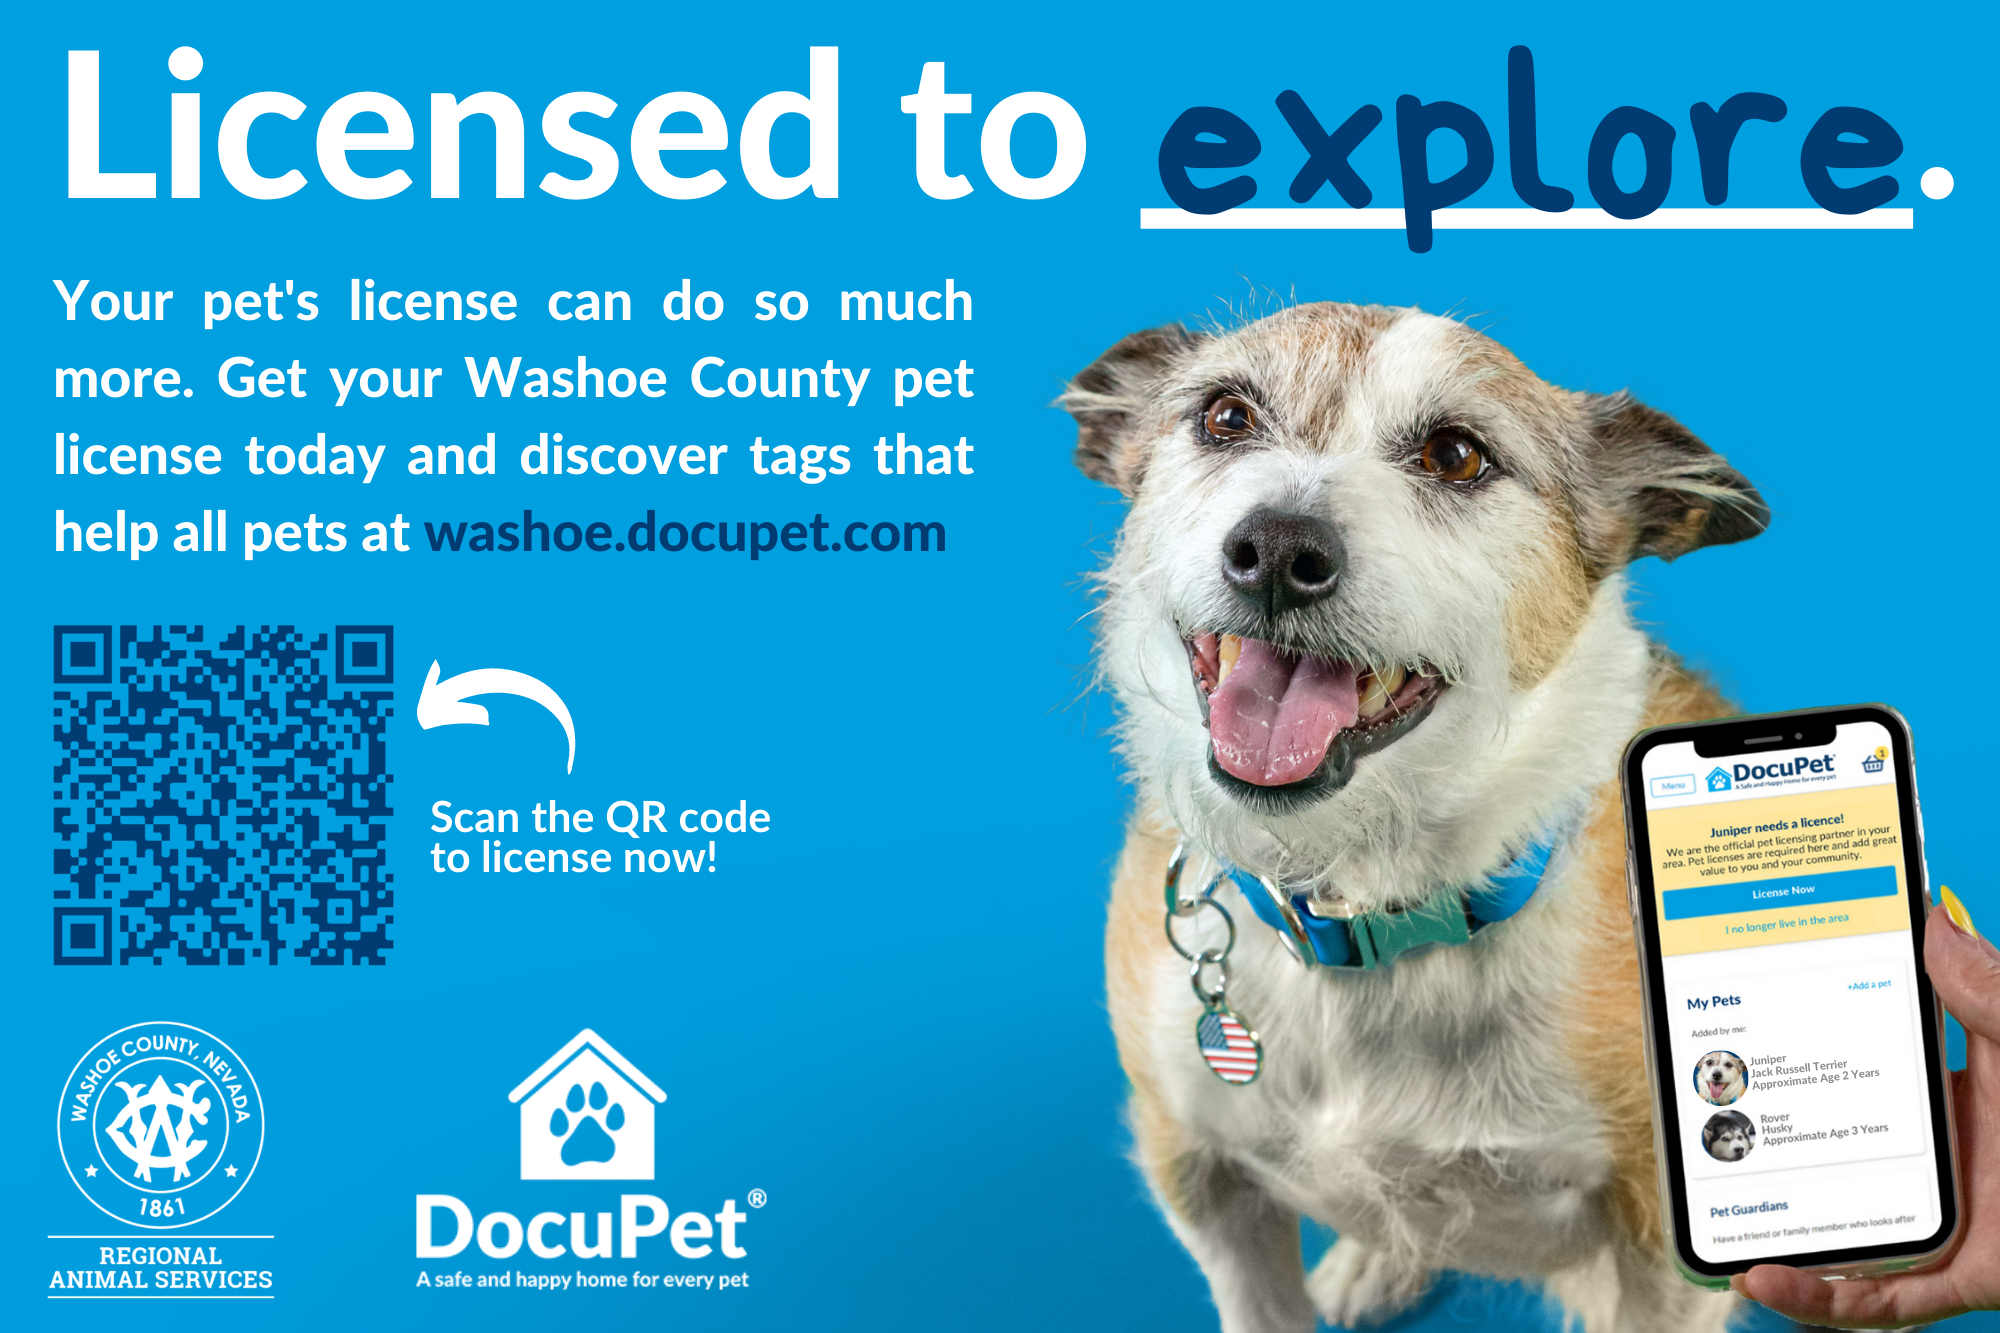 Now licensing through Docupet!